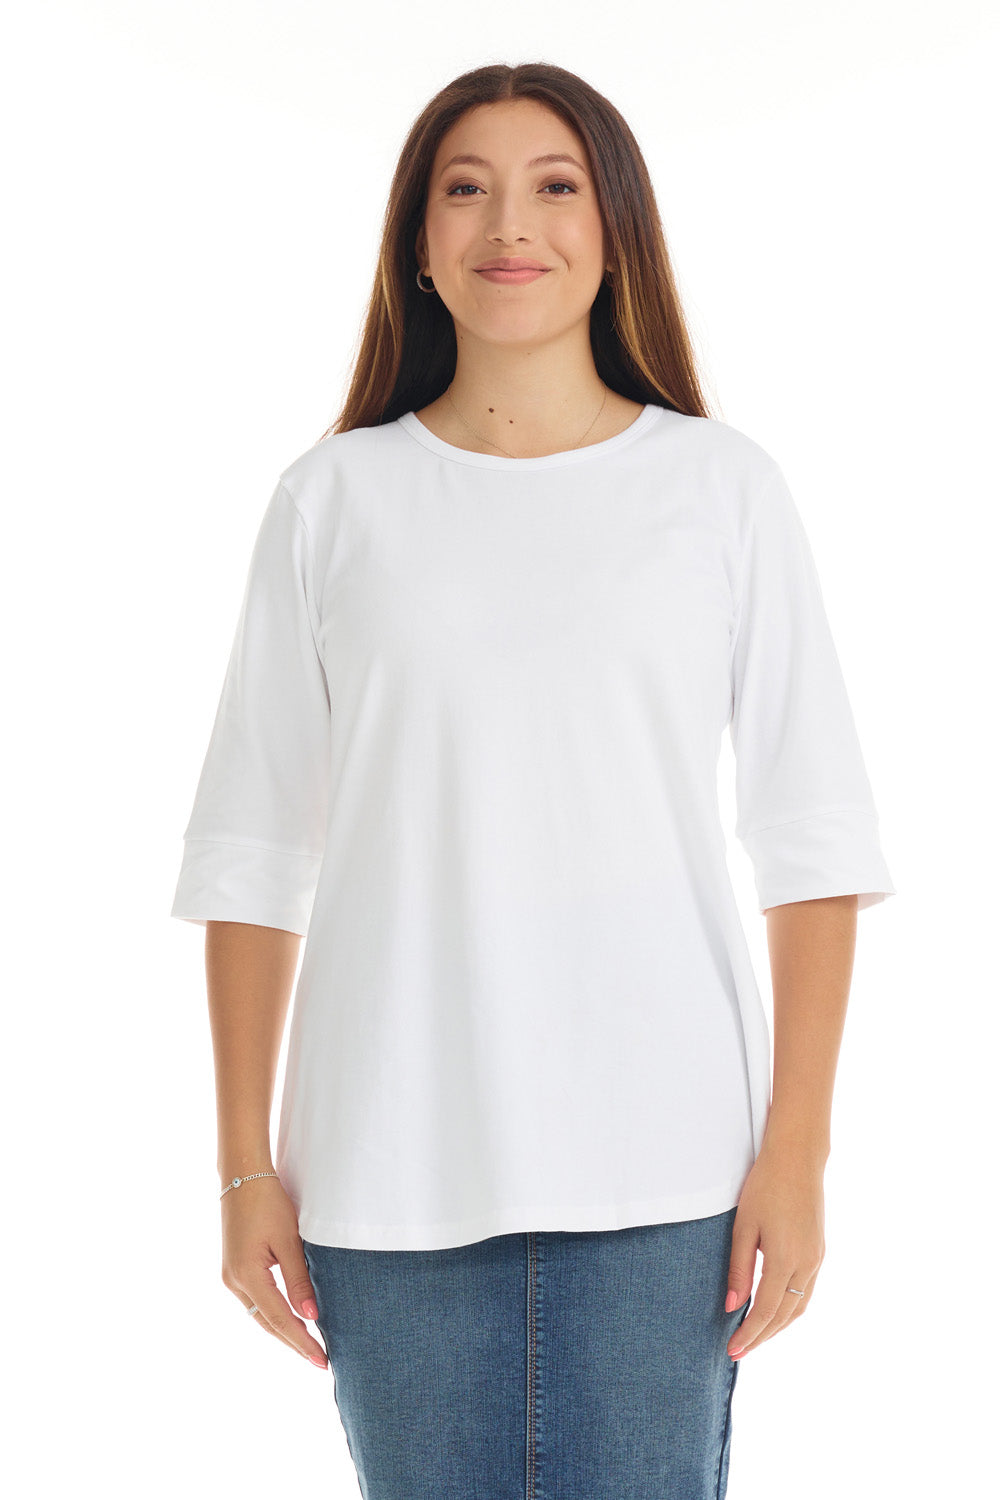 white color elbow sleeve shirt with cuff sleeve